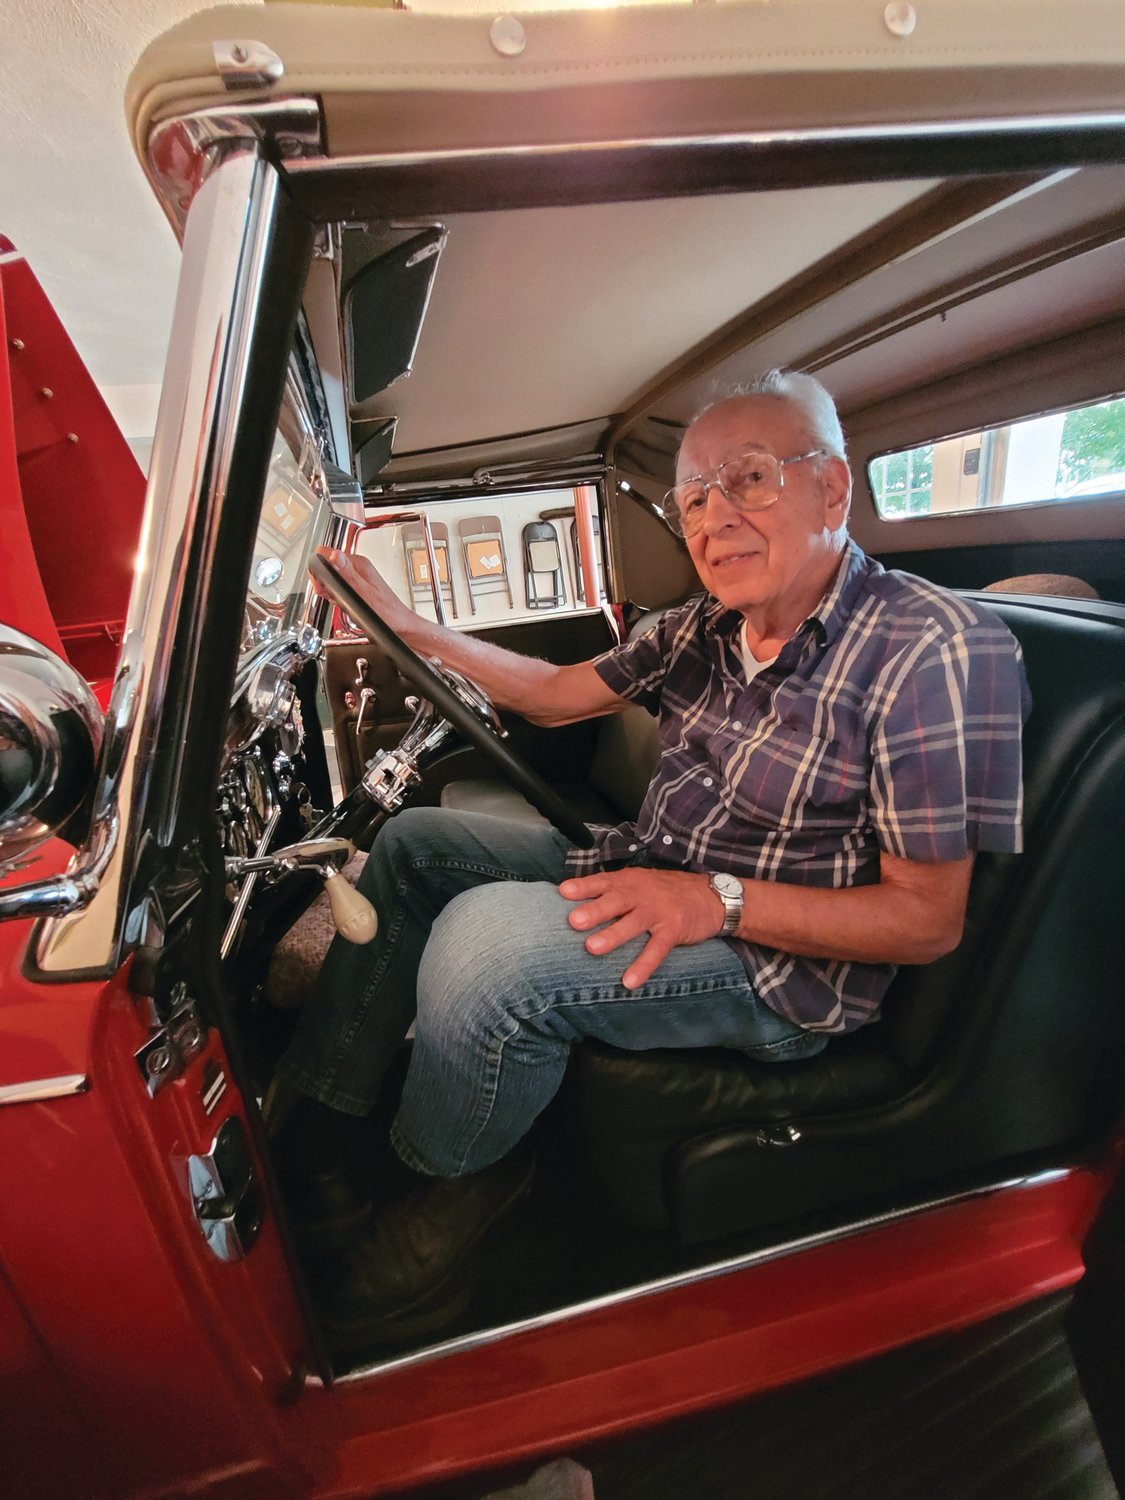 TIME TO CRUISE: John Ricci takes a seat behind the wheel of his 1934 Cadillac. This weekend, he’ll be driving the car that he restored to Newport to compete in the Concours d’Elegance.